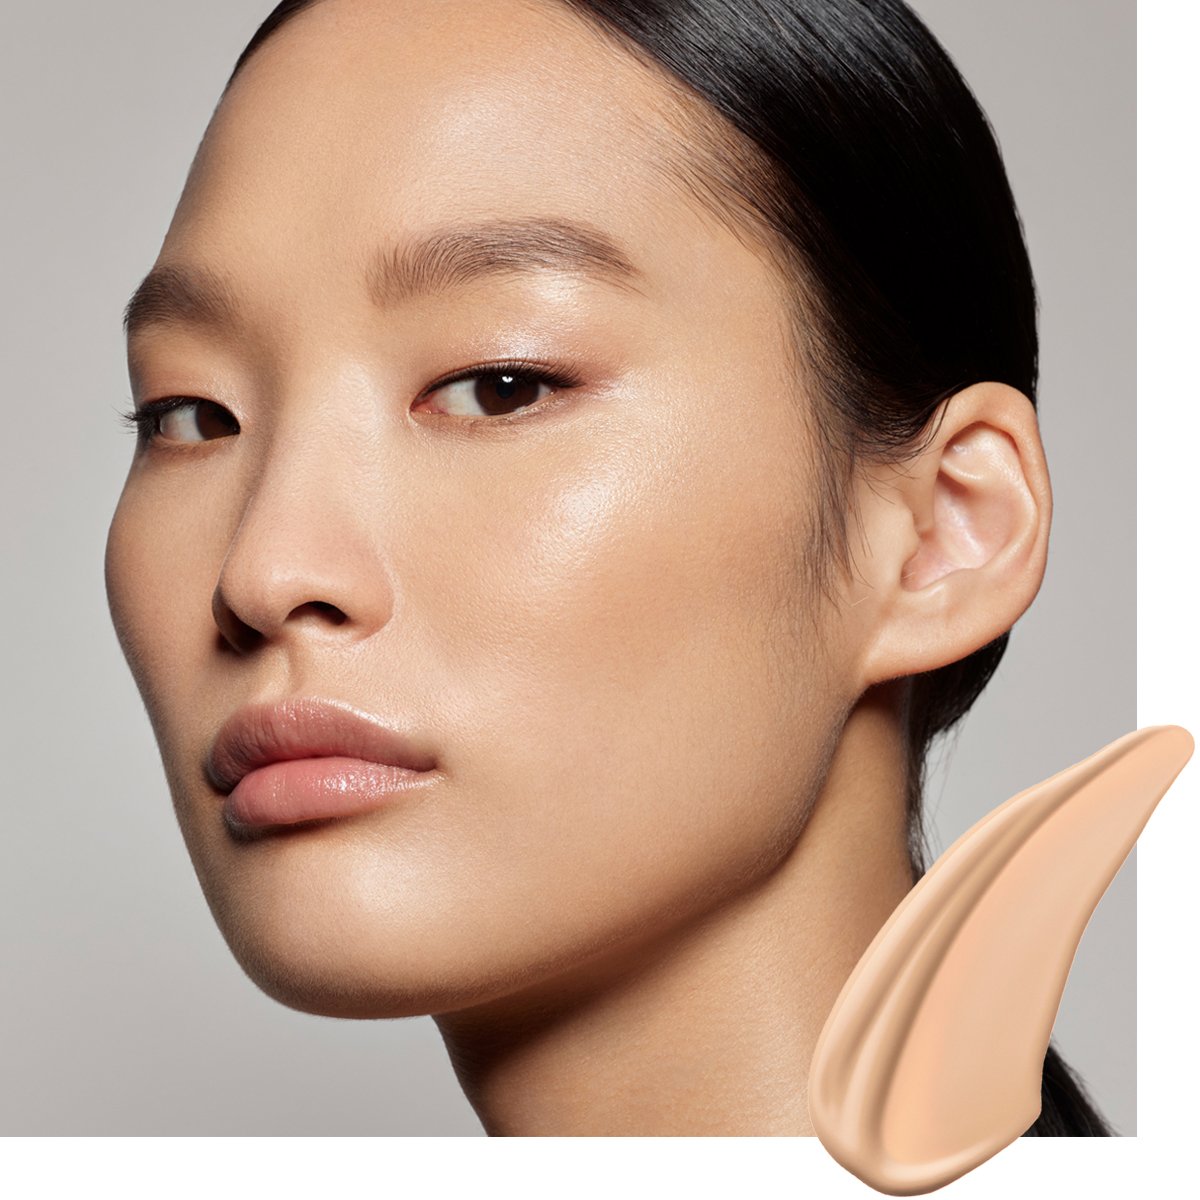 Load image into Gallery viewer, Pat McGrath Labs Sublime Perfection Foundation 35ml - LM10 (Light Medium w/ peach neutral undertones)
